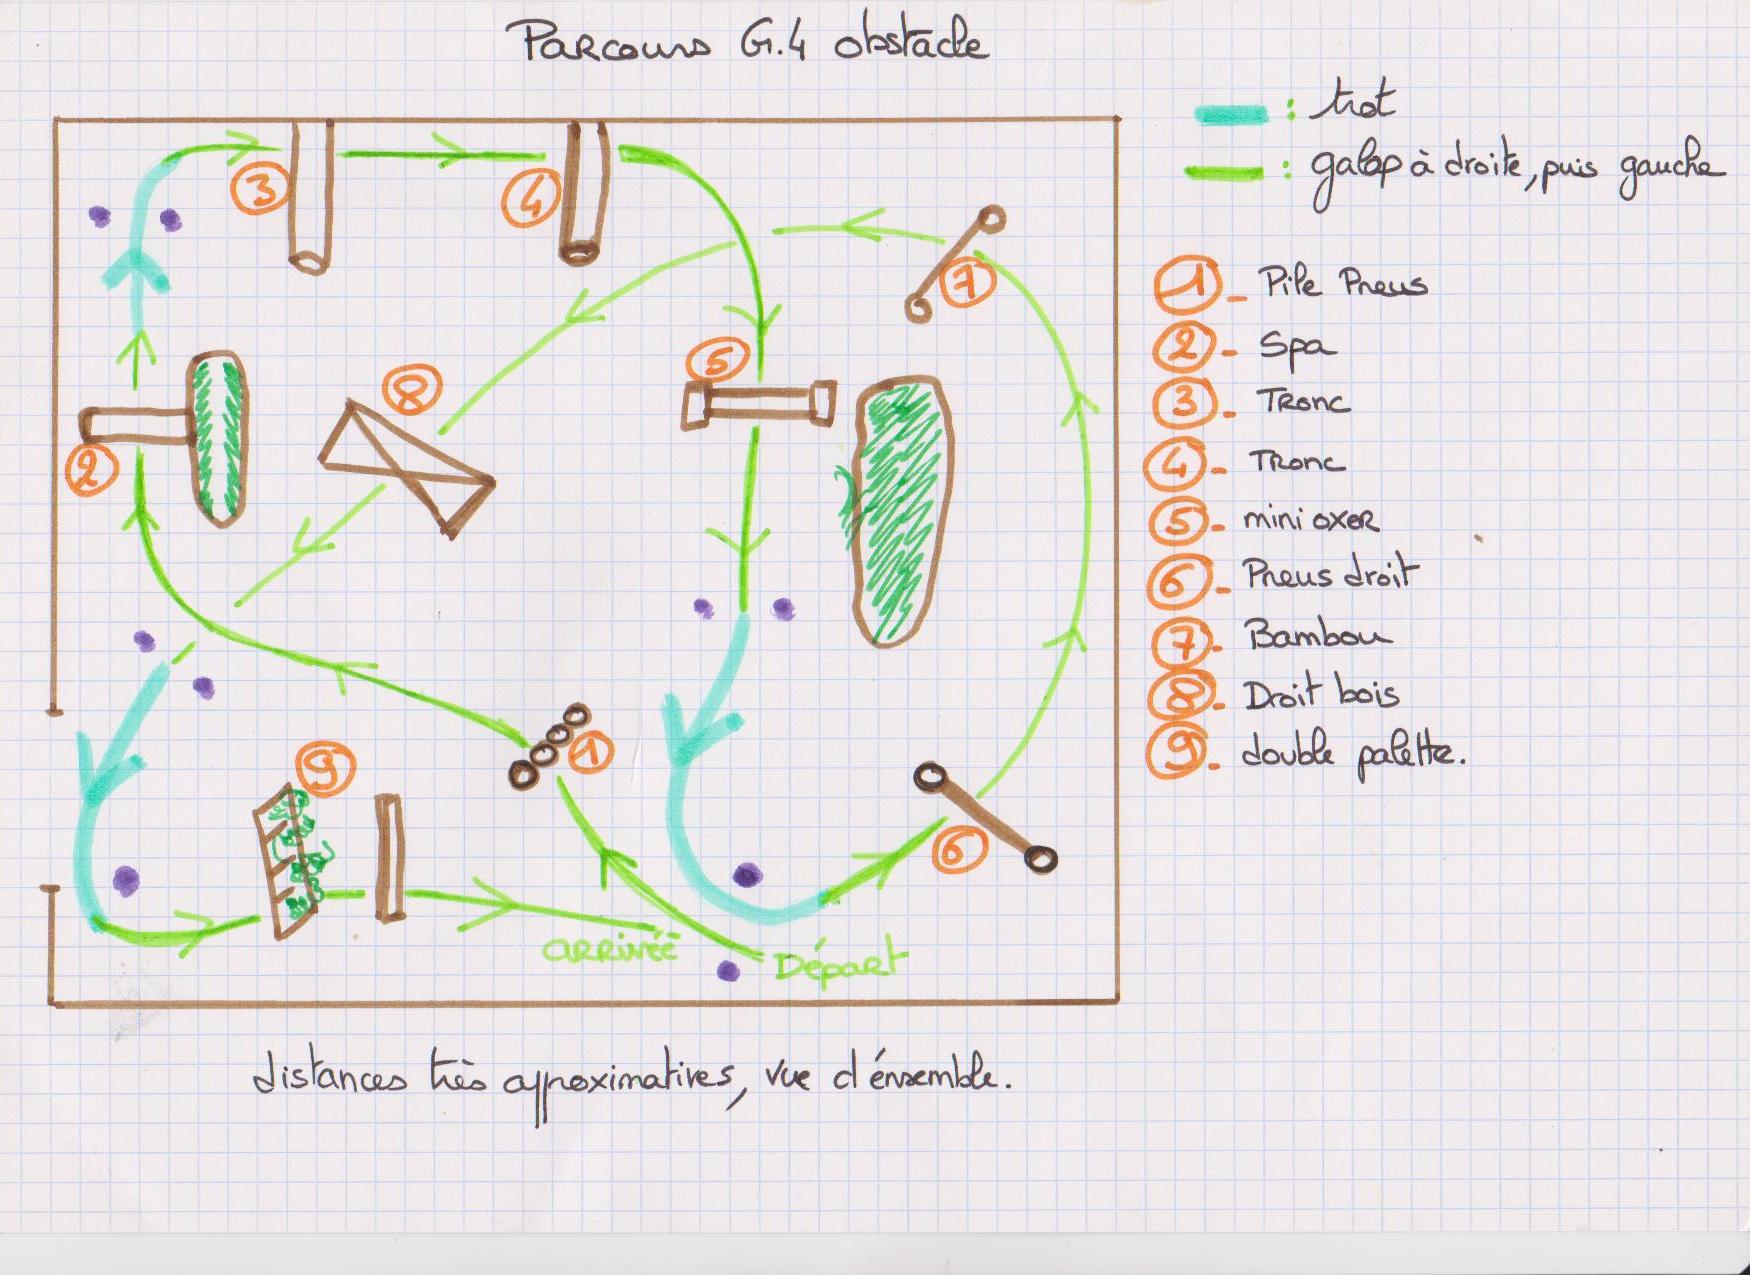 parcours obstacle G.4.jpg